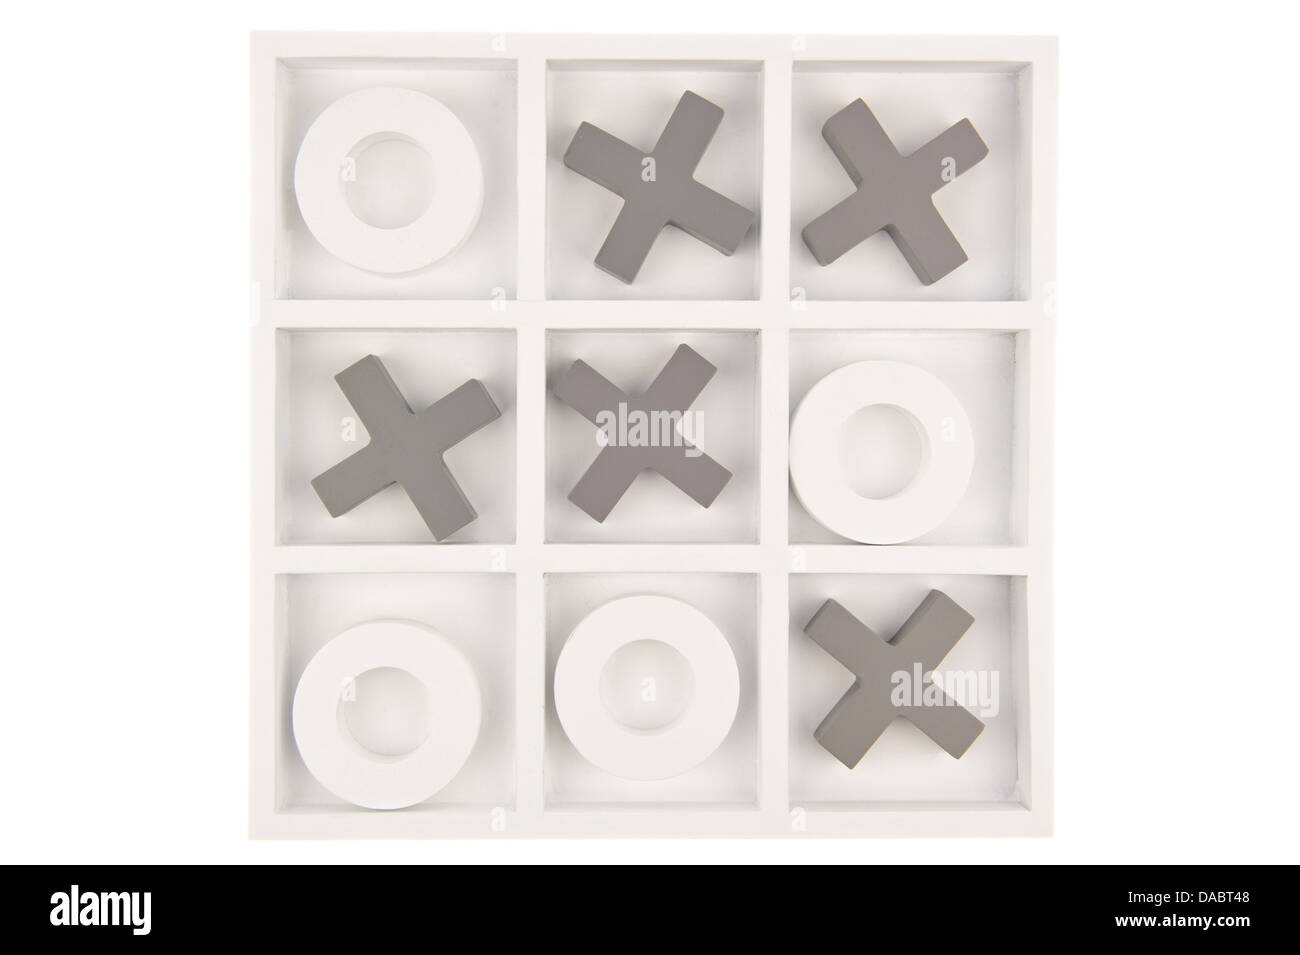 Wooden noughts and crosses game board in gray and white colors isolated in white background Stock Photo